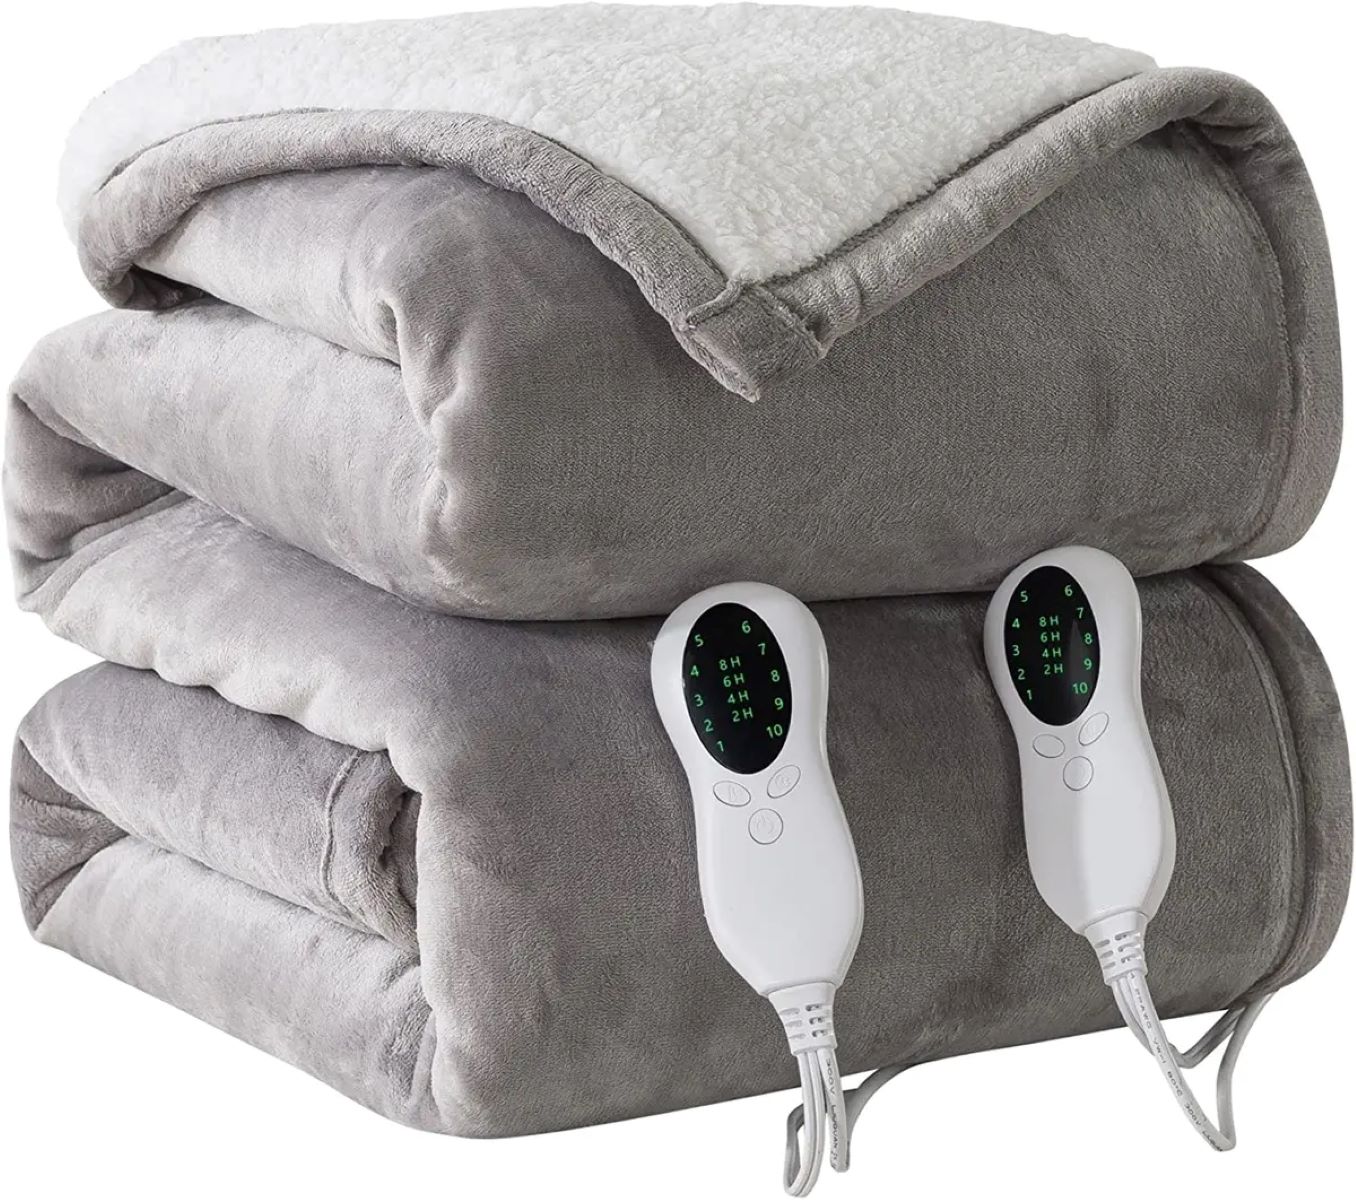 Quick Fix For Flashing Light On Electric Blanket!